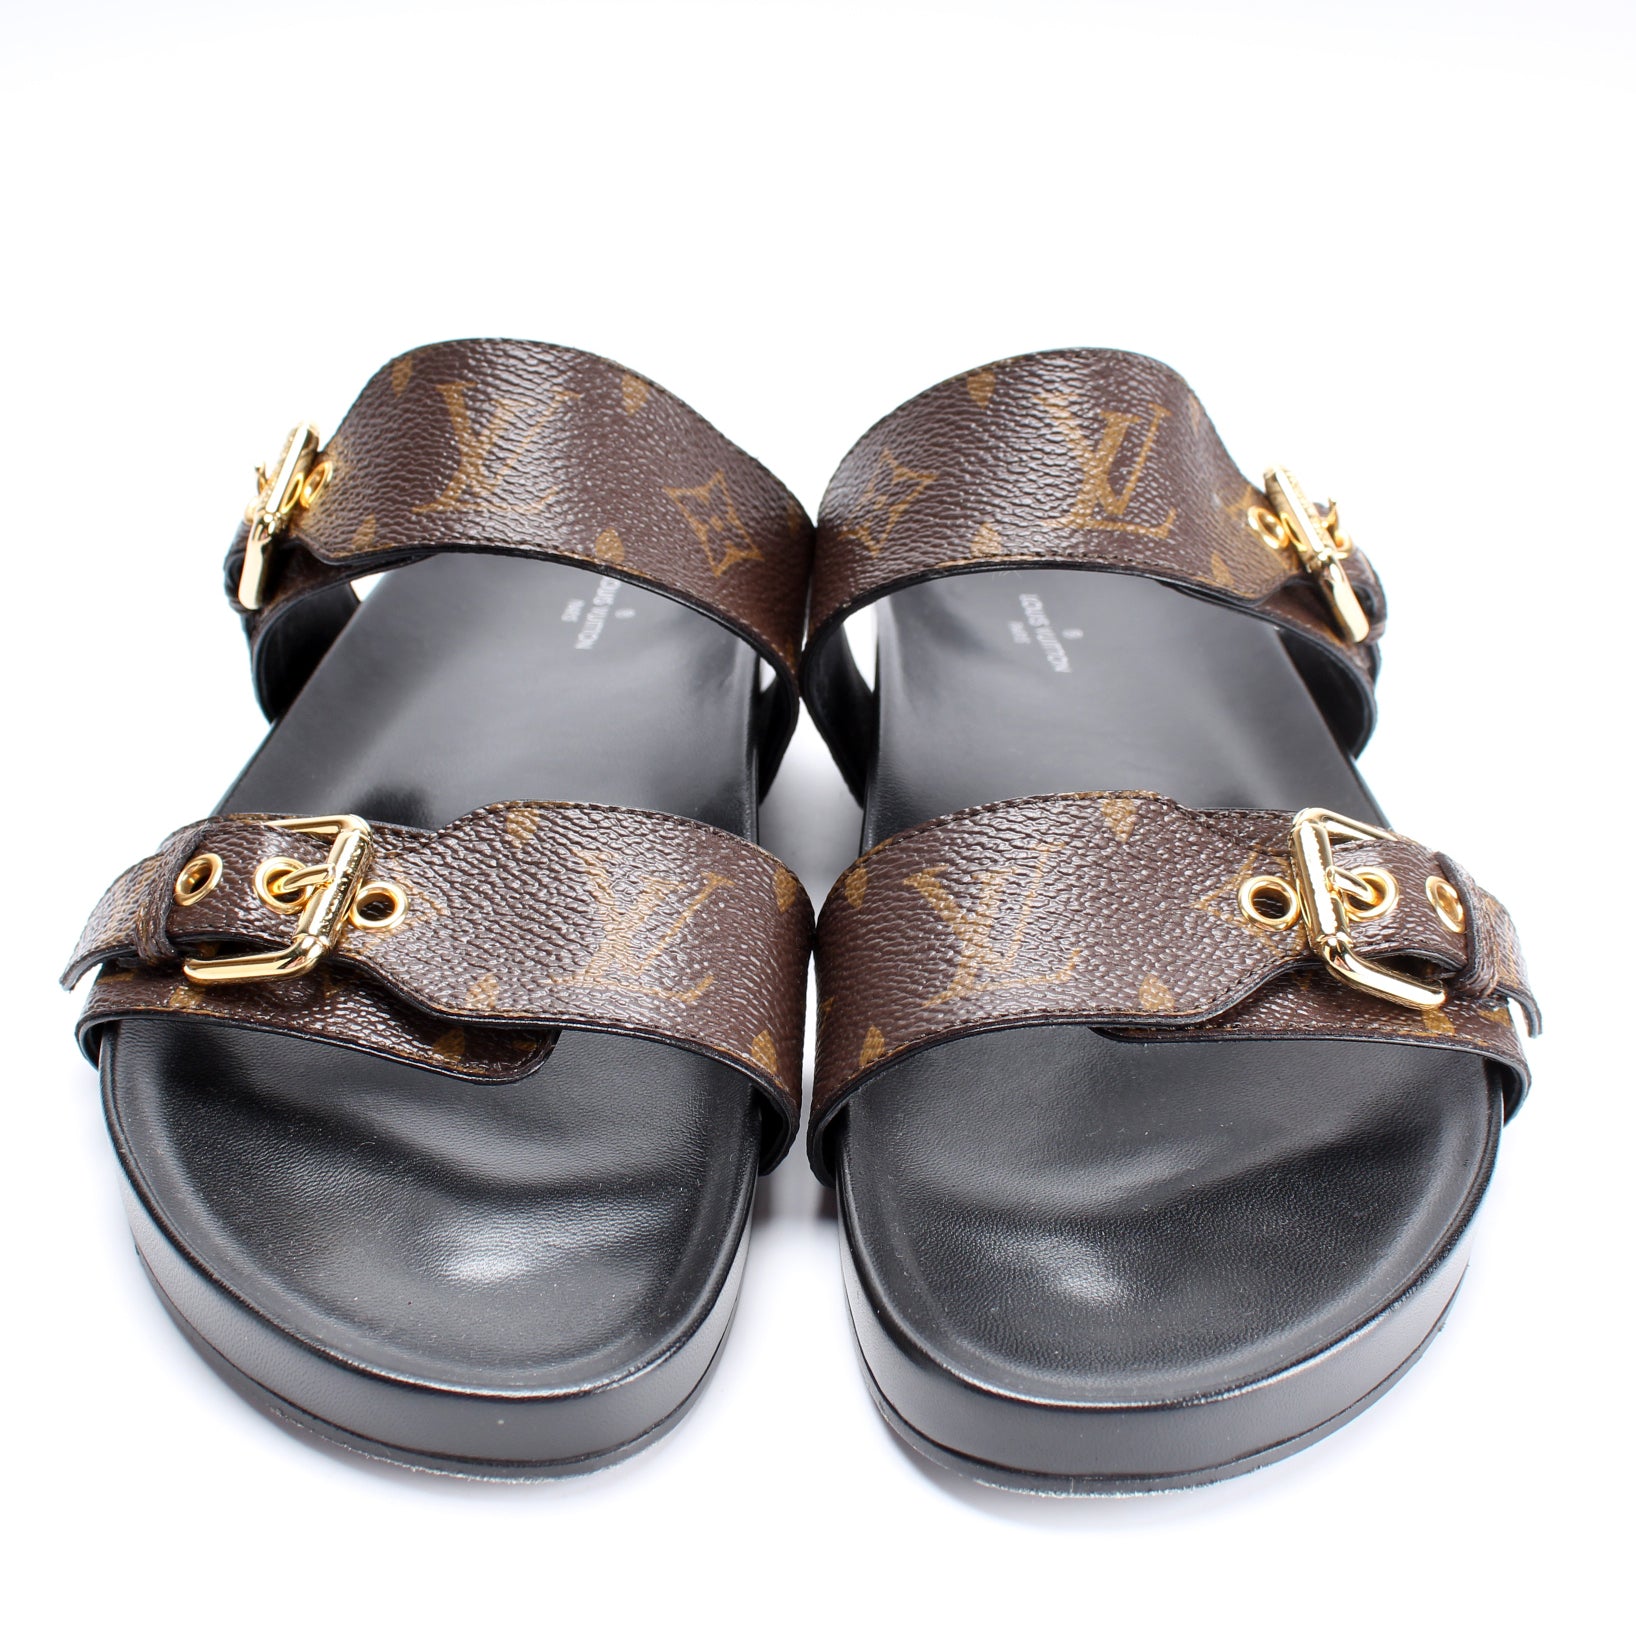 Louis Vuitton - Authenticated Bom Dia Sandal - Leather Brown for Women, Never Worn